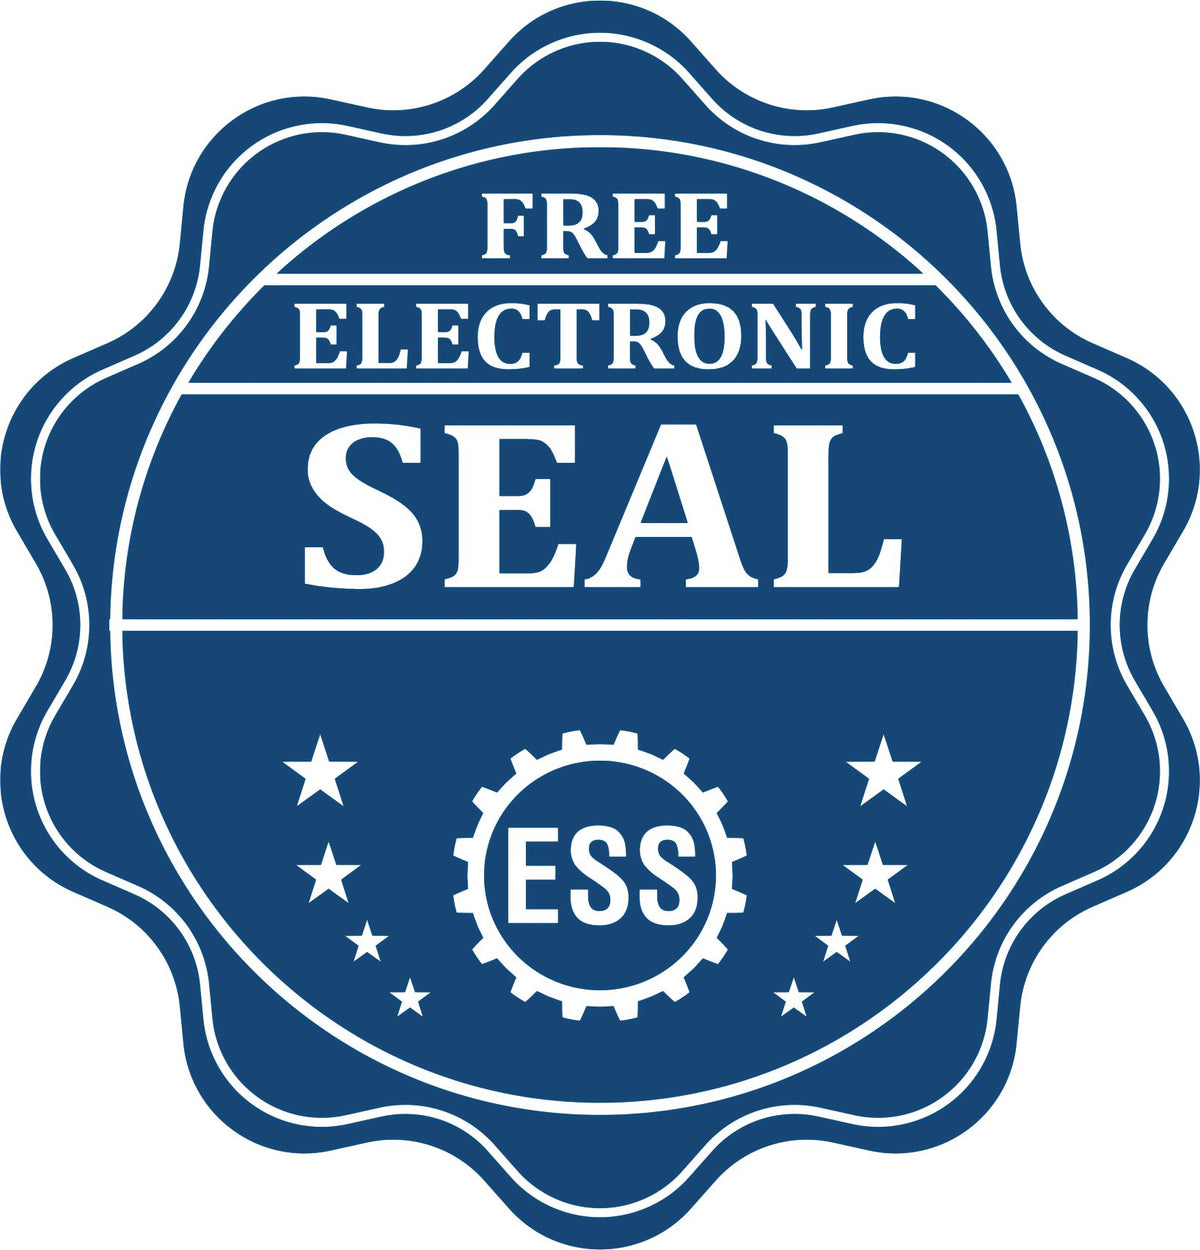 A badge showing a free electronic seal for the Wooden Handle Colorado Rectangular Notary Public Stamp with stars and the ESS gear on the emblem.